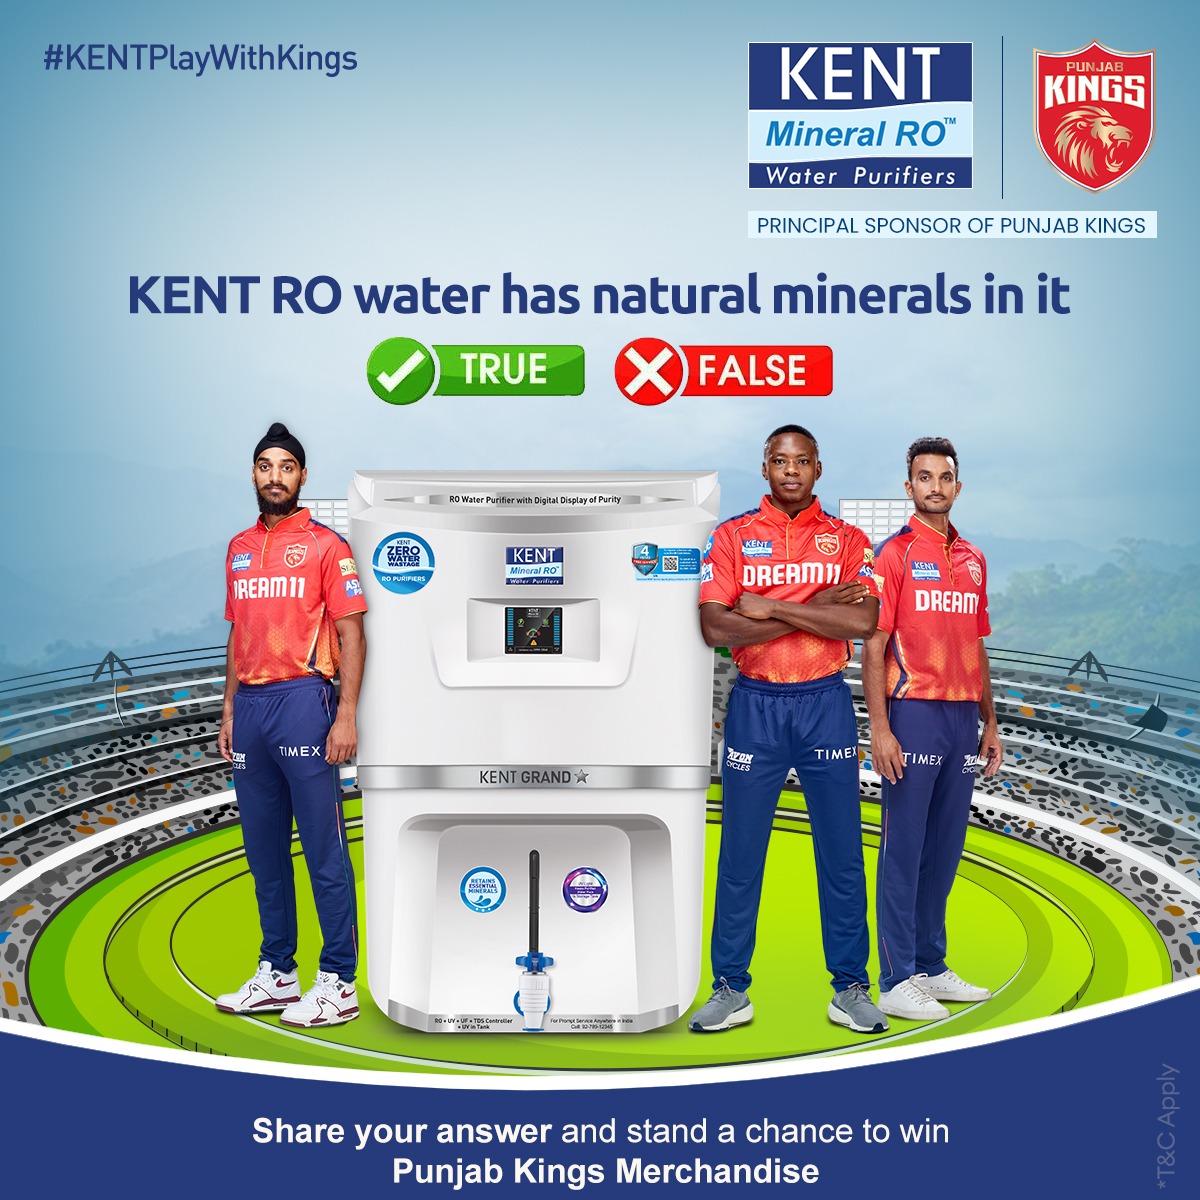 Participate in the #KENTPlayWithKings Contest & stand a chance to win some amazing Punjab Kings merchandise. Contest Rules: 1. Comment your answer to the question. 2. Follow @kentrosystems 3. Invite three friends in the comments to participate in the contest T&C Apply.